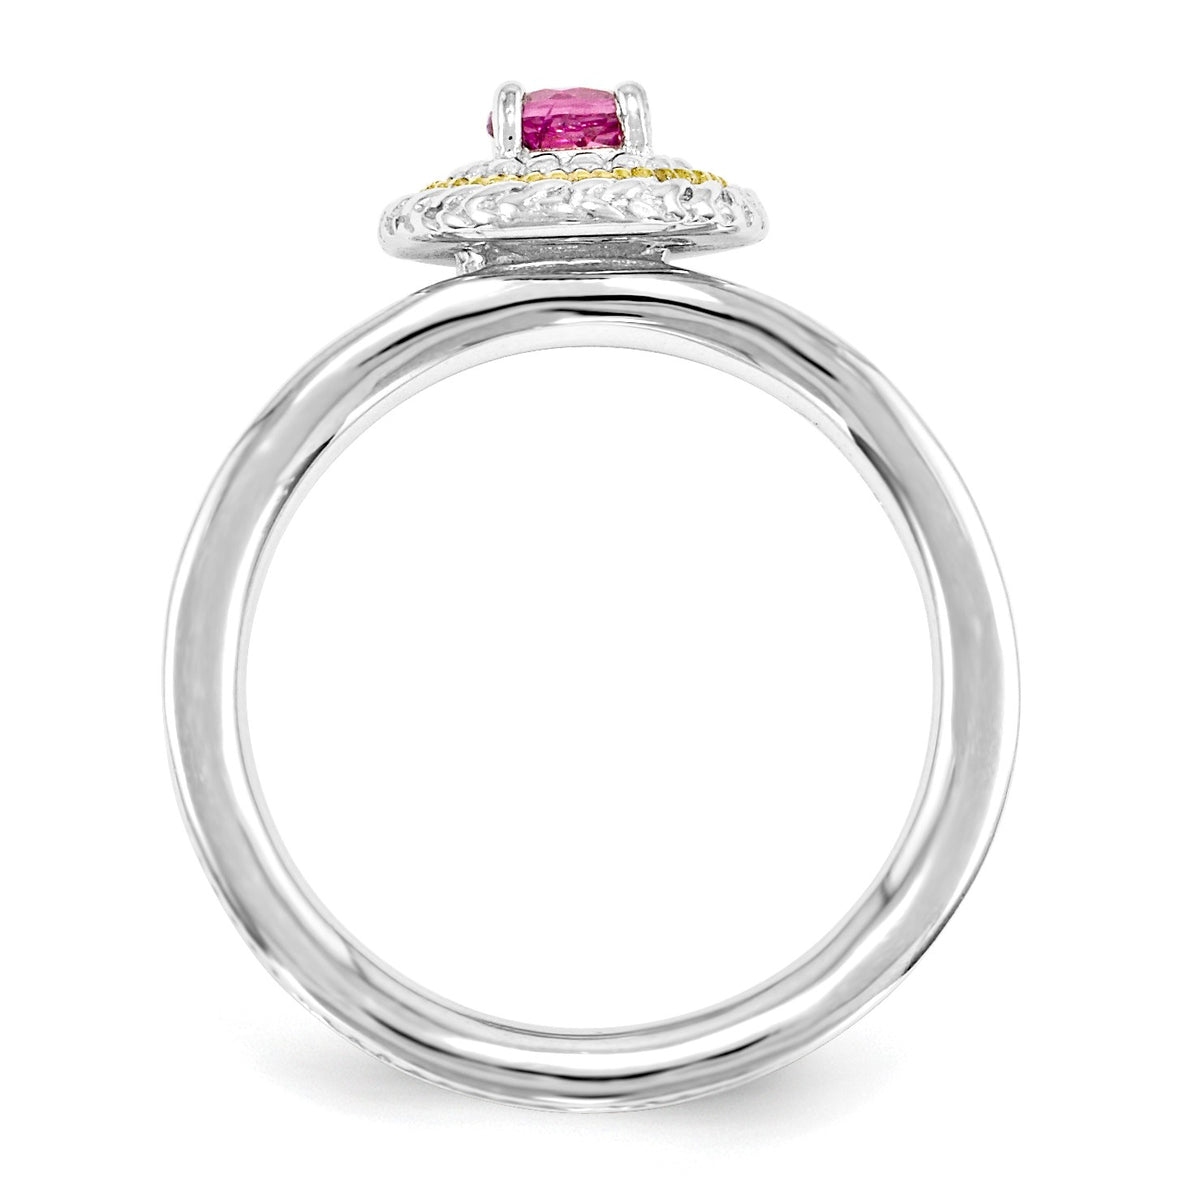 Alternate view of the Sterling Silver &amp; 14K Gold Plated Stackable Pink Tourmaline Ring by The Black Bow Jewelry Co.